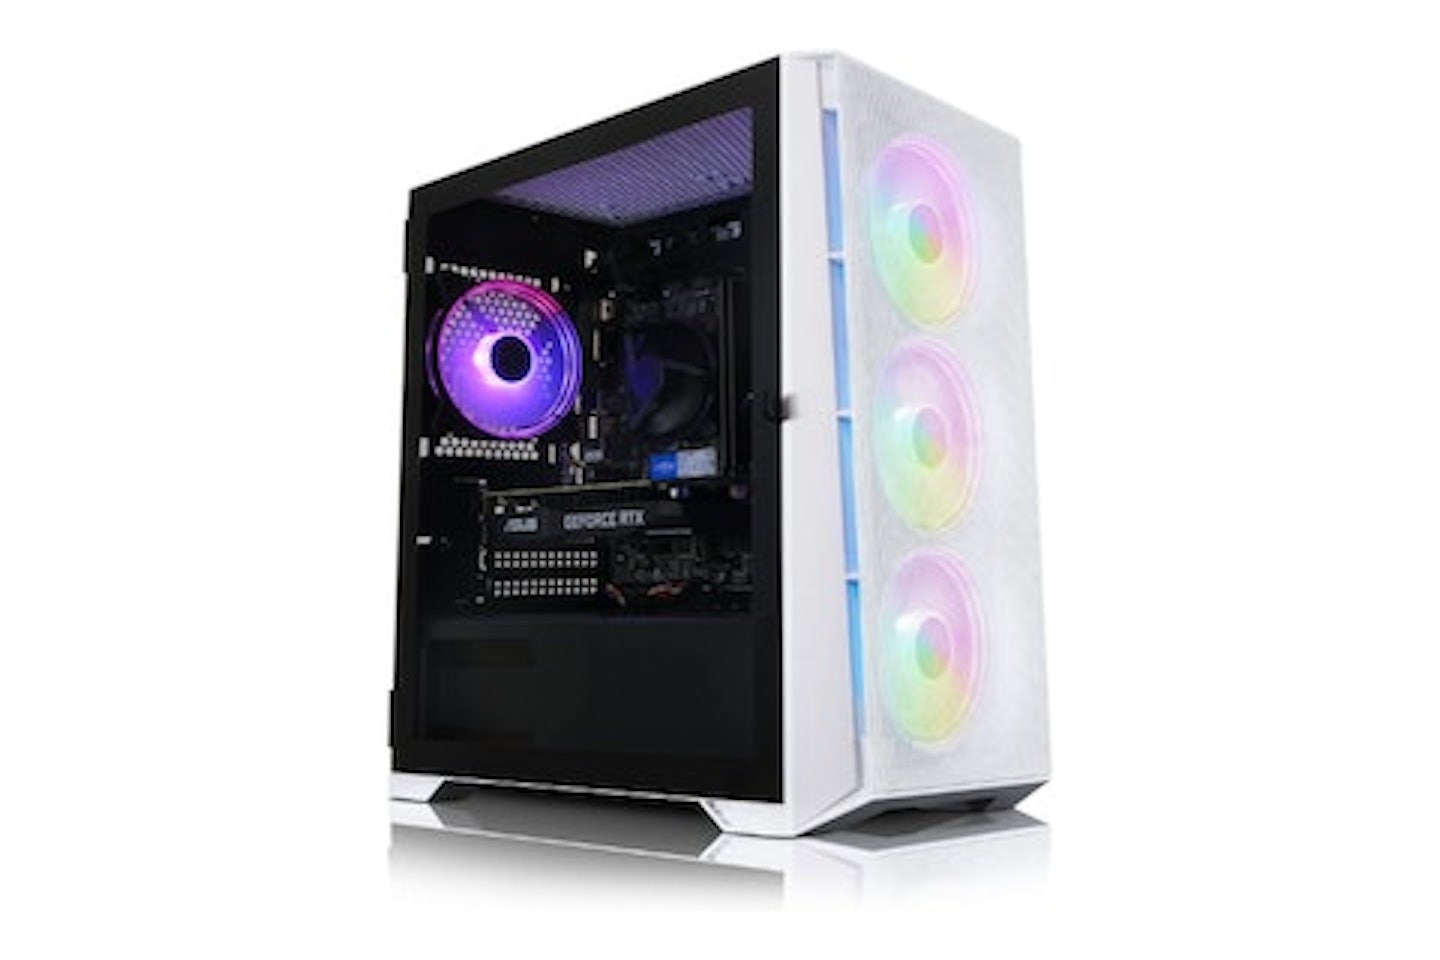 ADMI Gaming PC - one of the best budget PCs